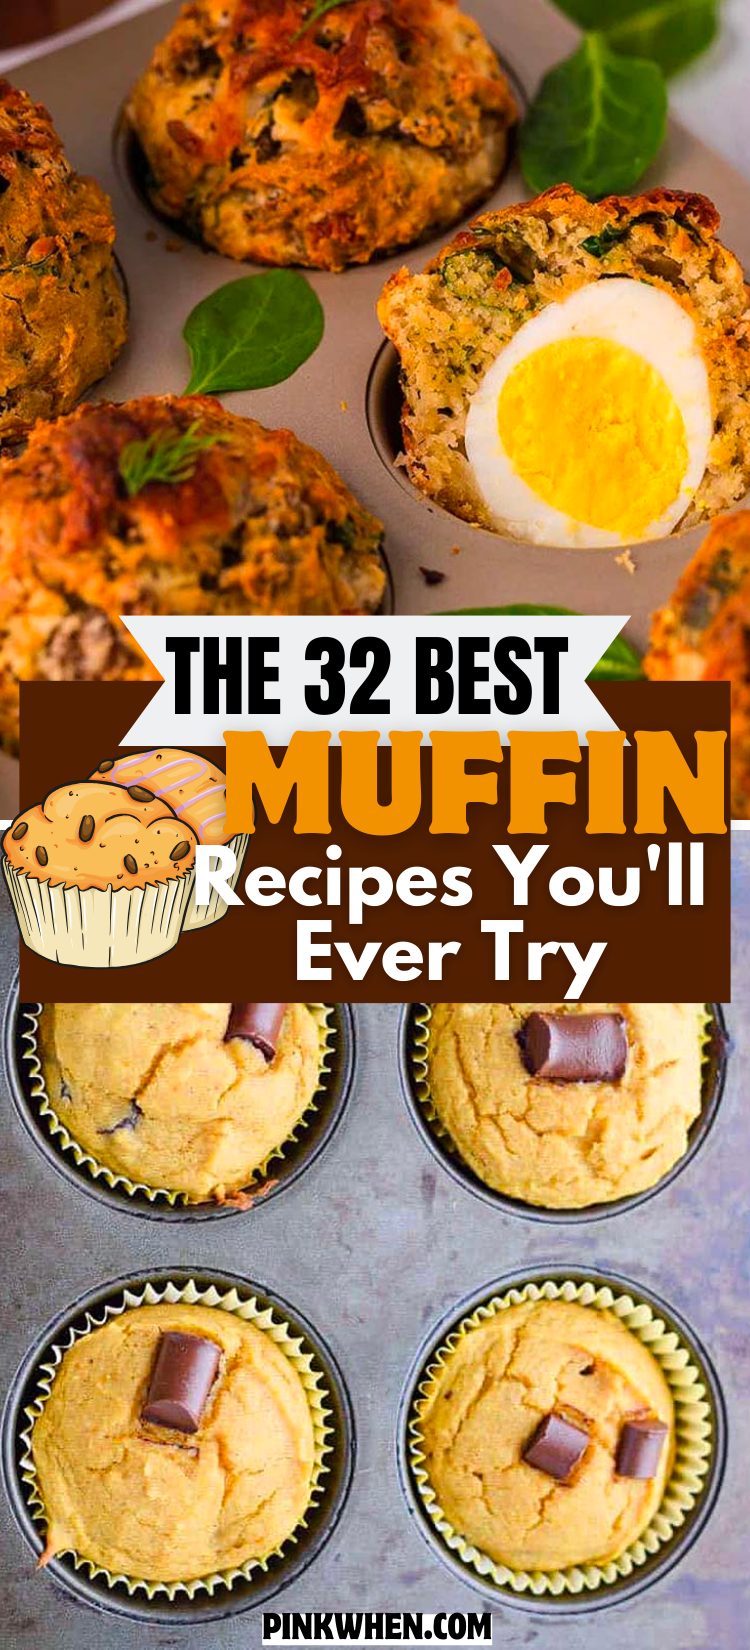 The 36 Best Muffin Recipes You’ll Ever Try